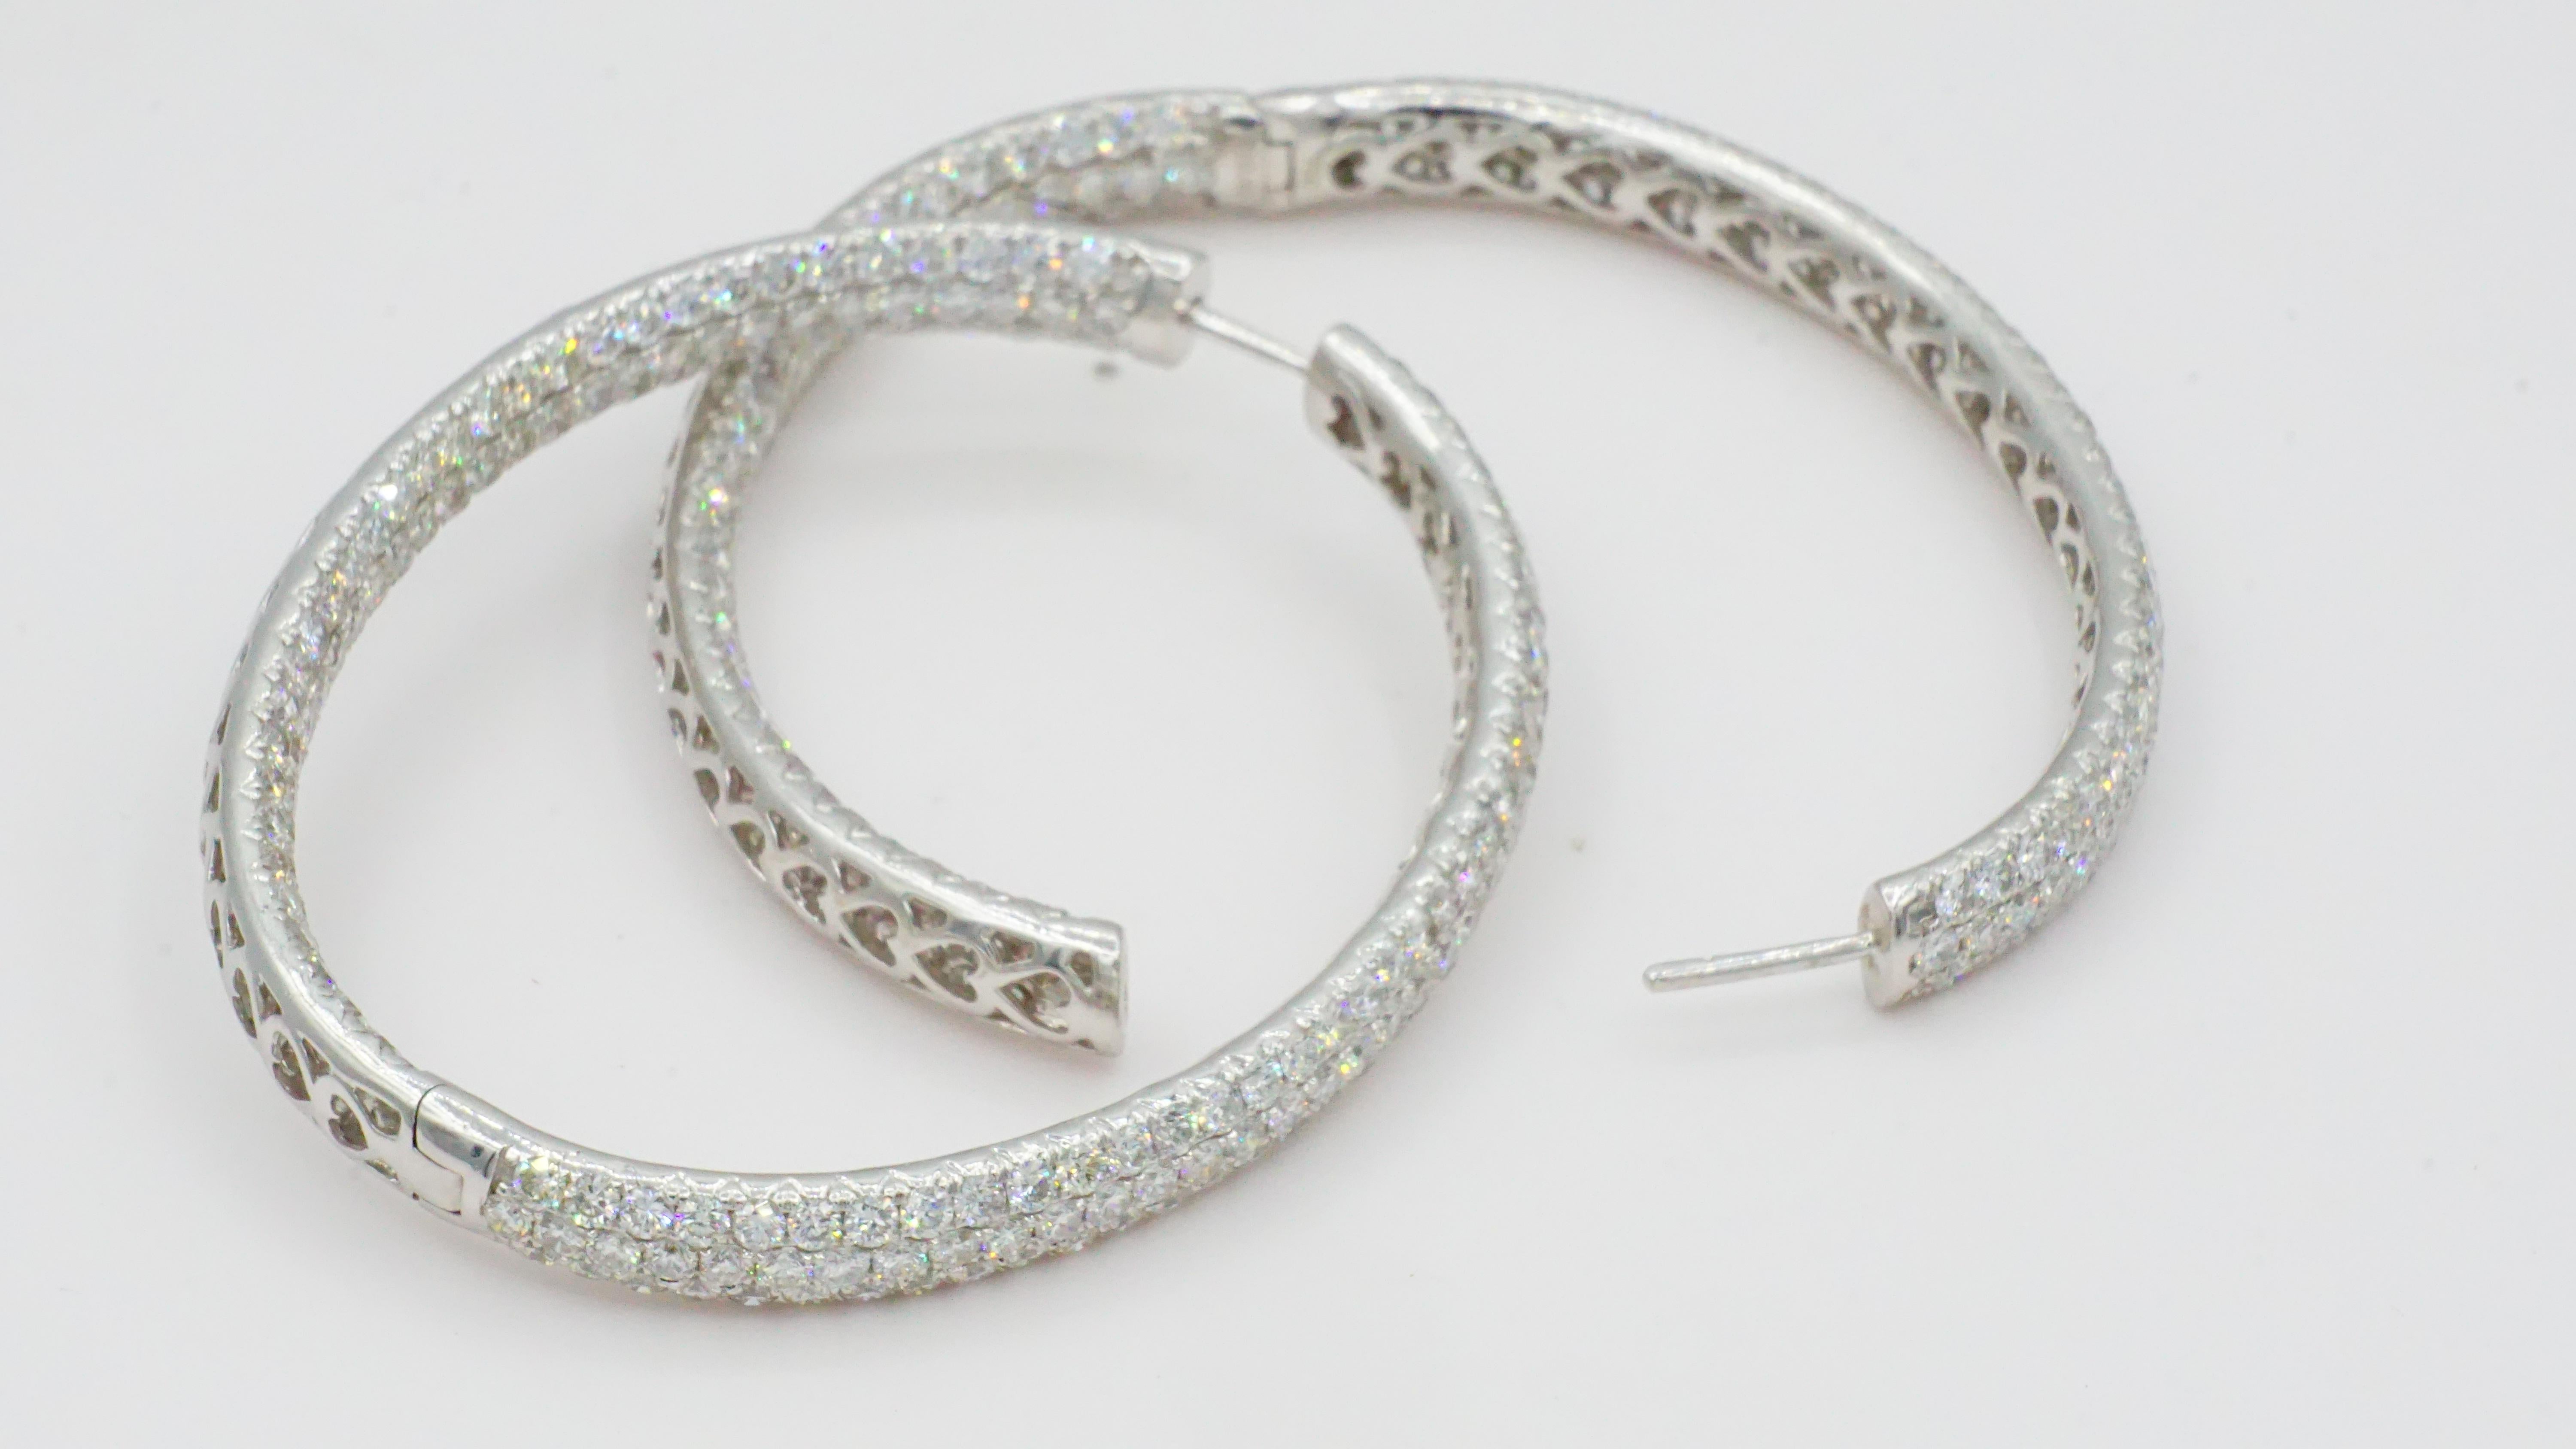 Round Cut 18kt White Gold Pave Diamond Hoop Earrings, Hinged Oval, 10.80cttw., Like-New